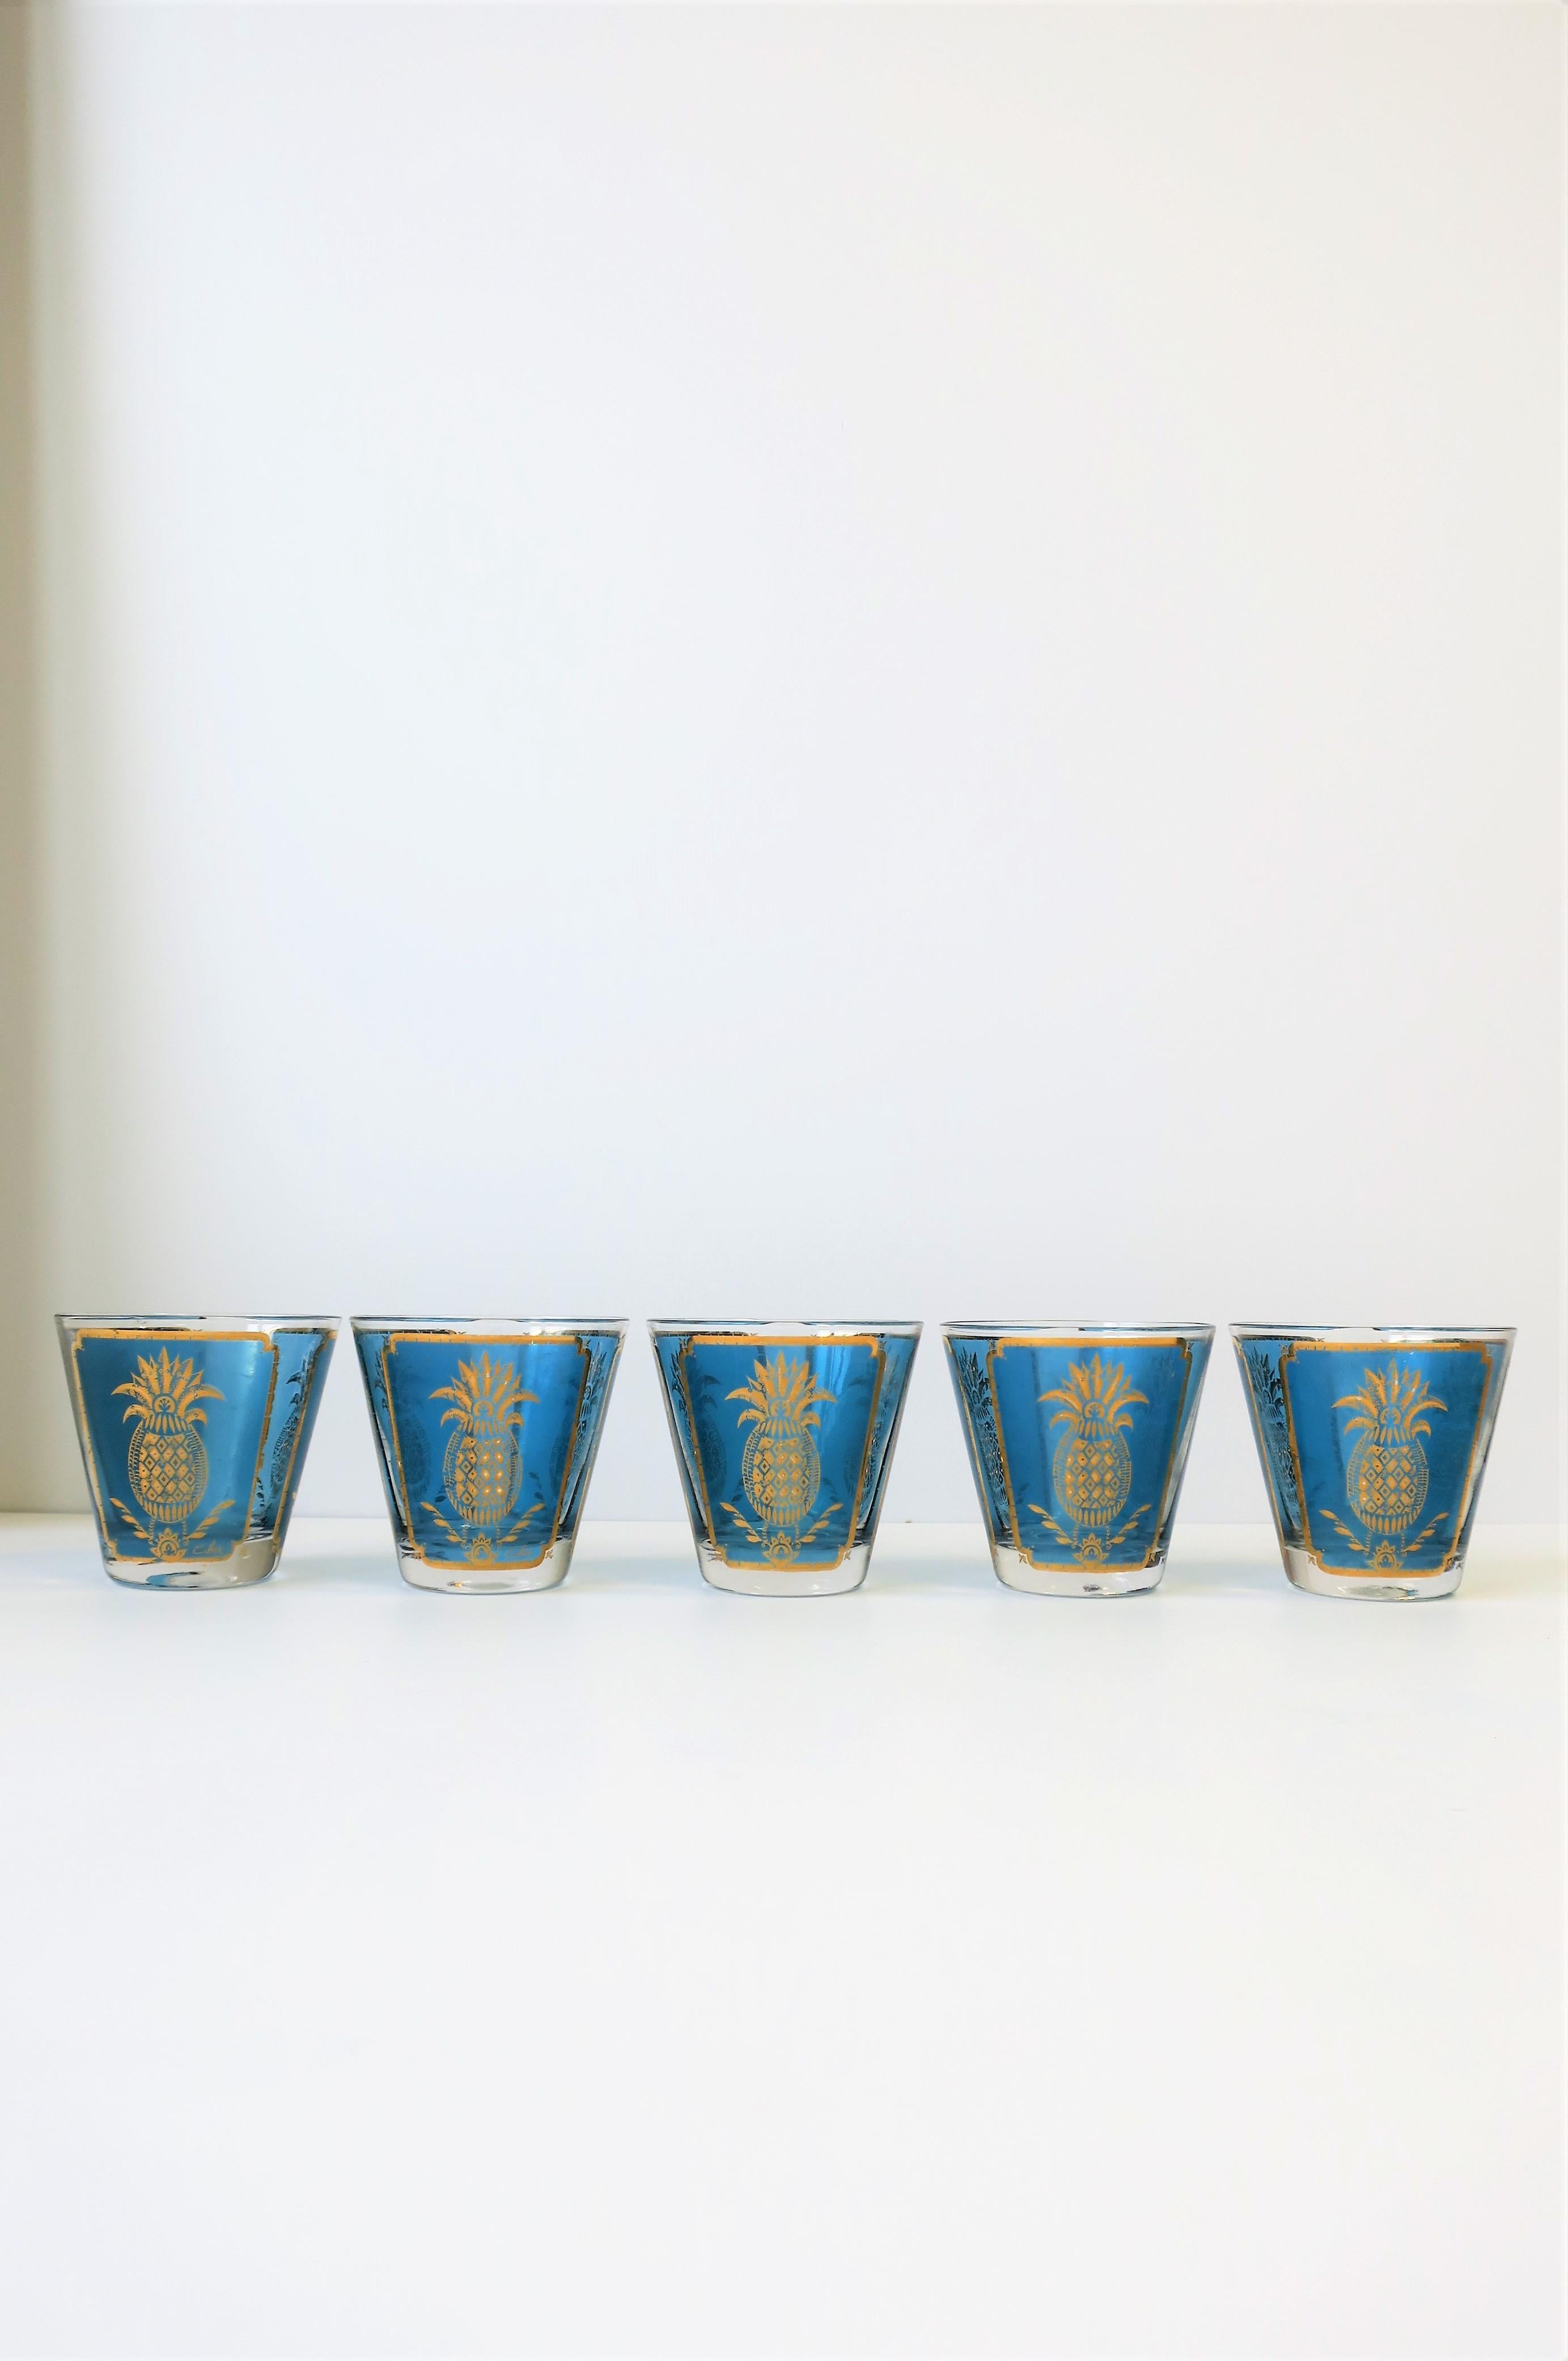 Hollywood Regency Midcentury Blue and Gold Rocks Cocktail Glasses with Pineapple Design